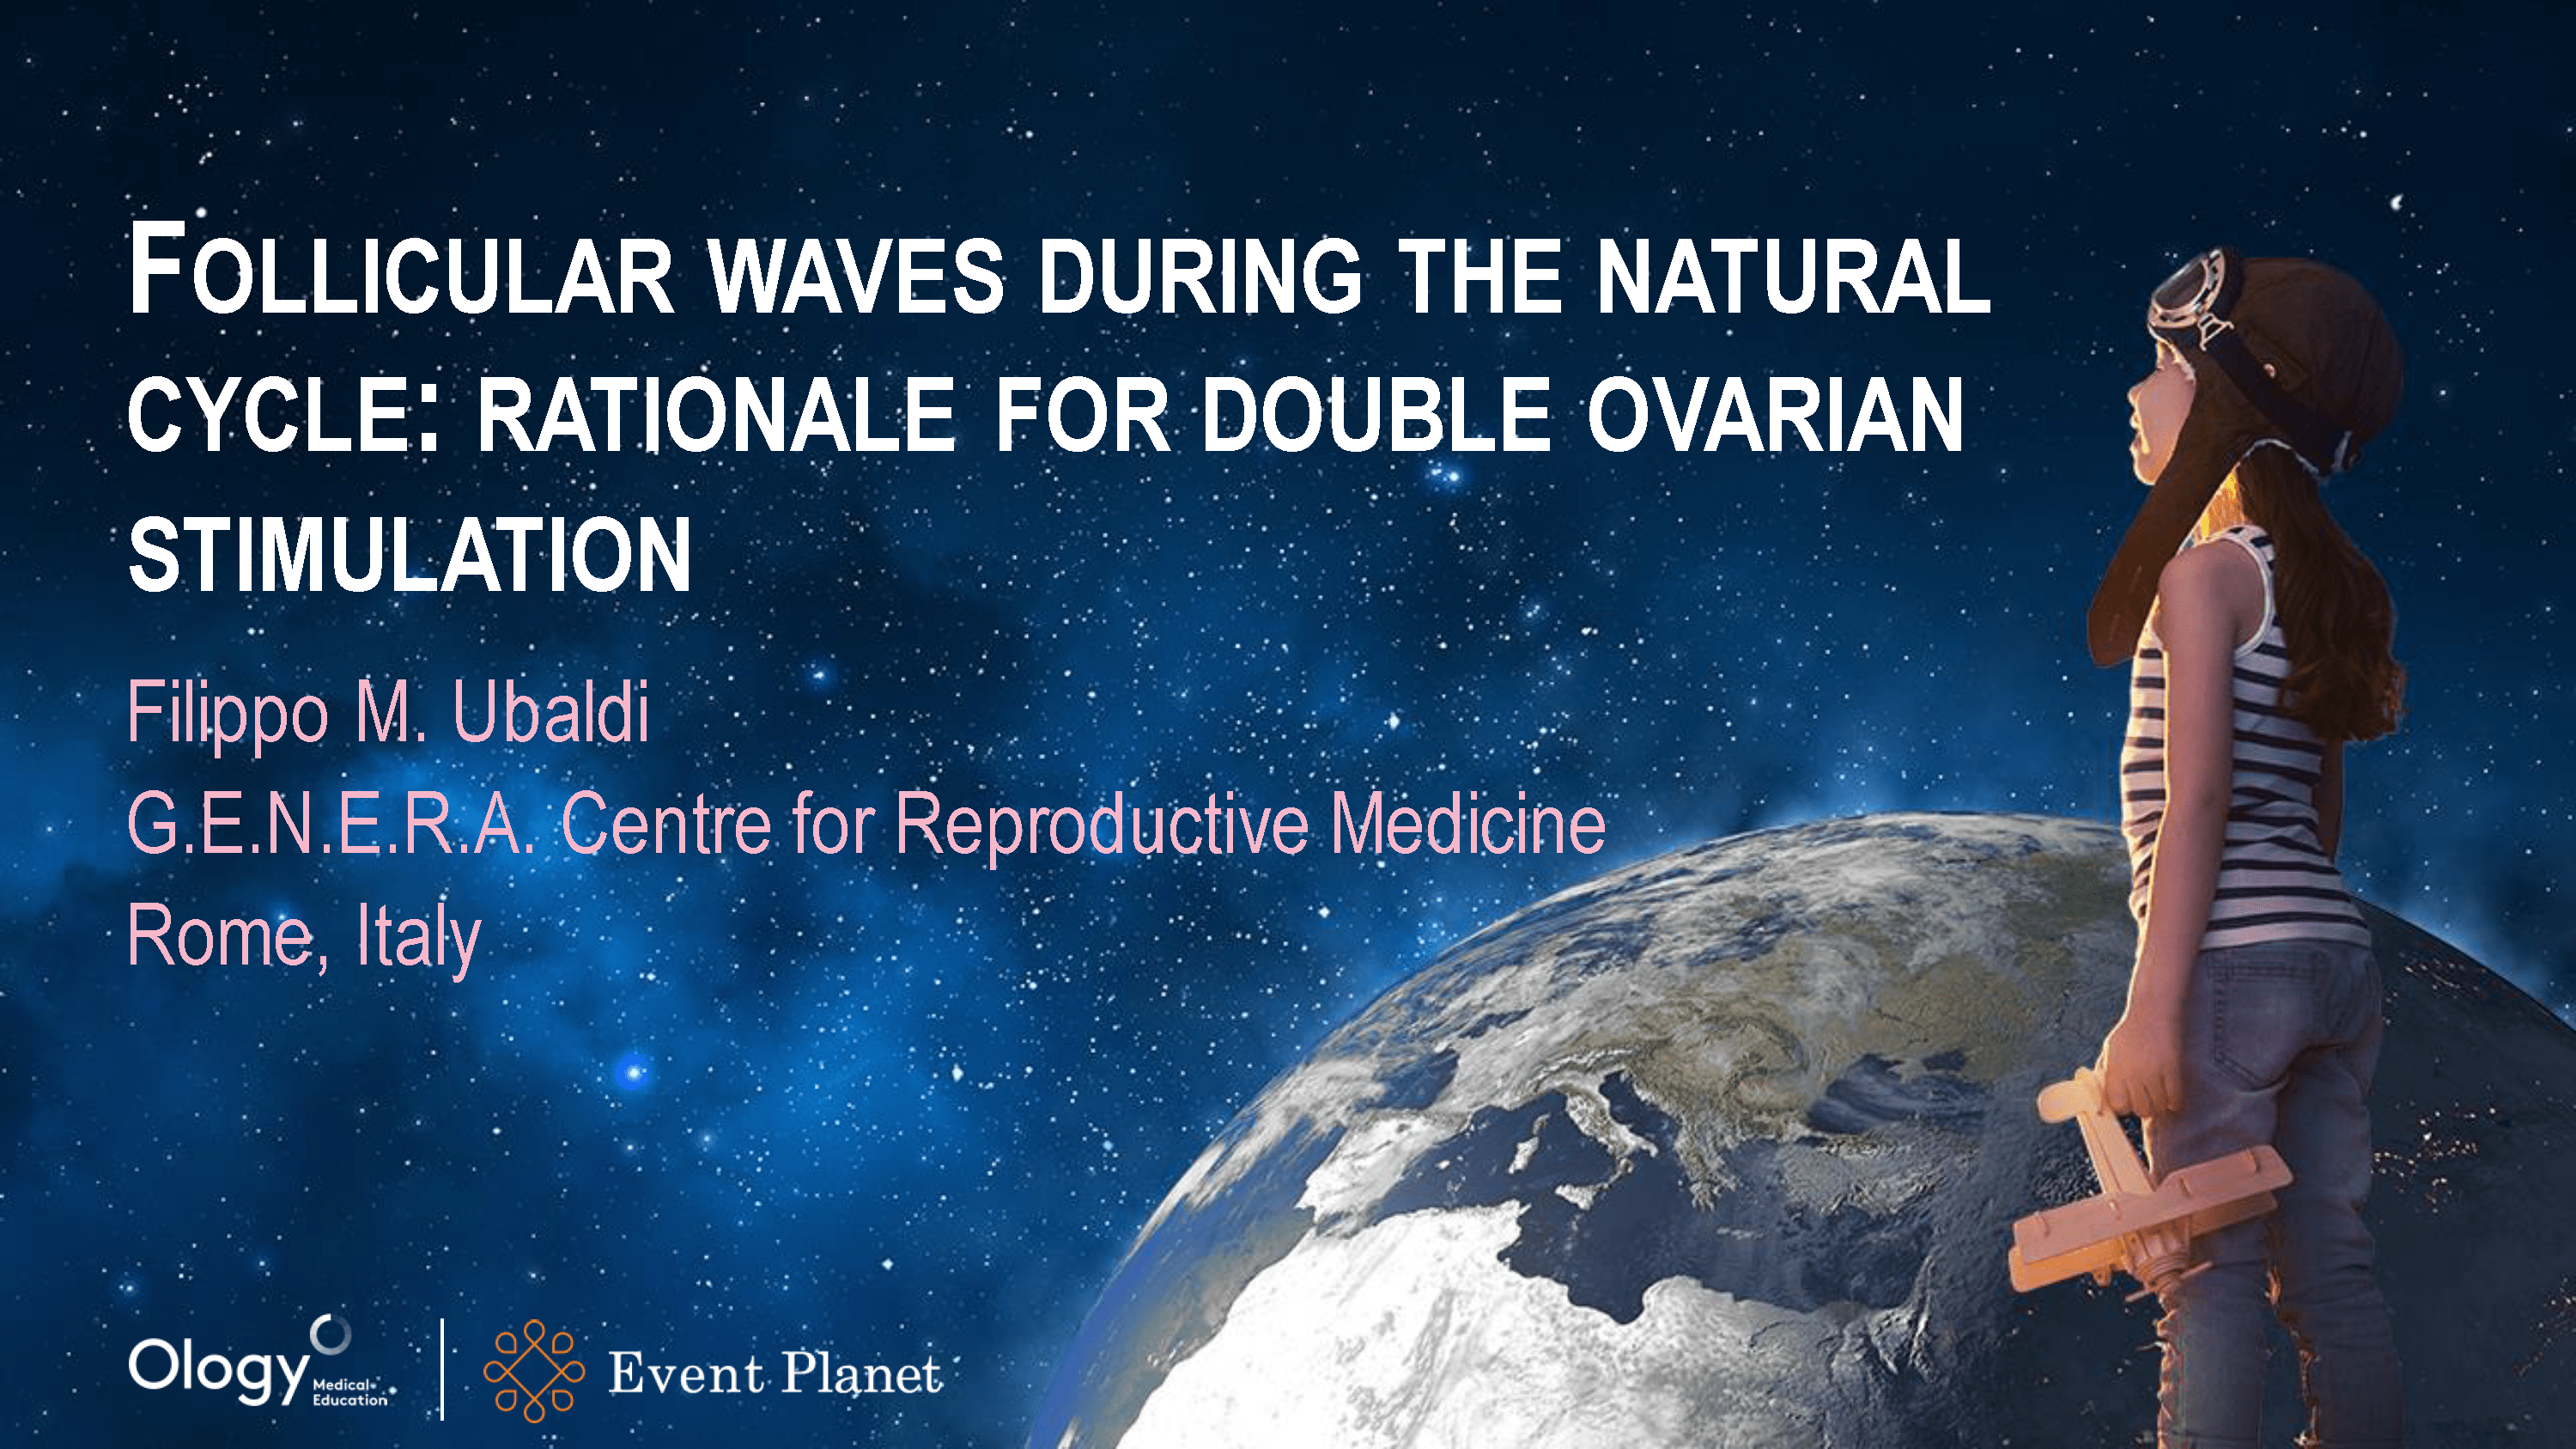 Follicular waves during the natural cycle: rationale for double ovarian stimulation 